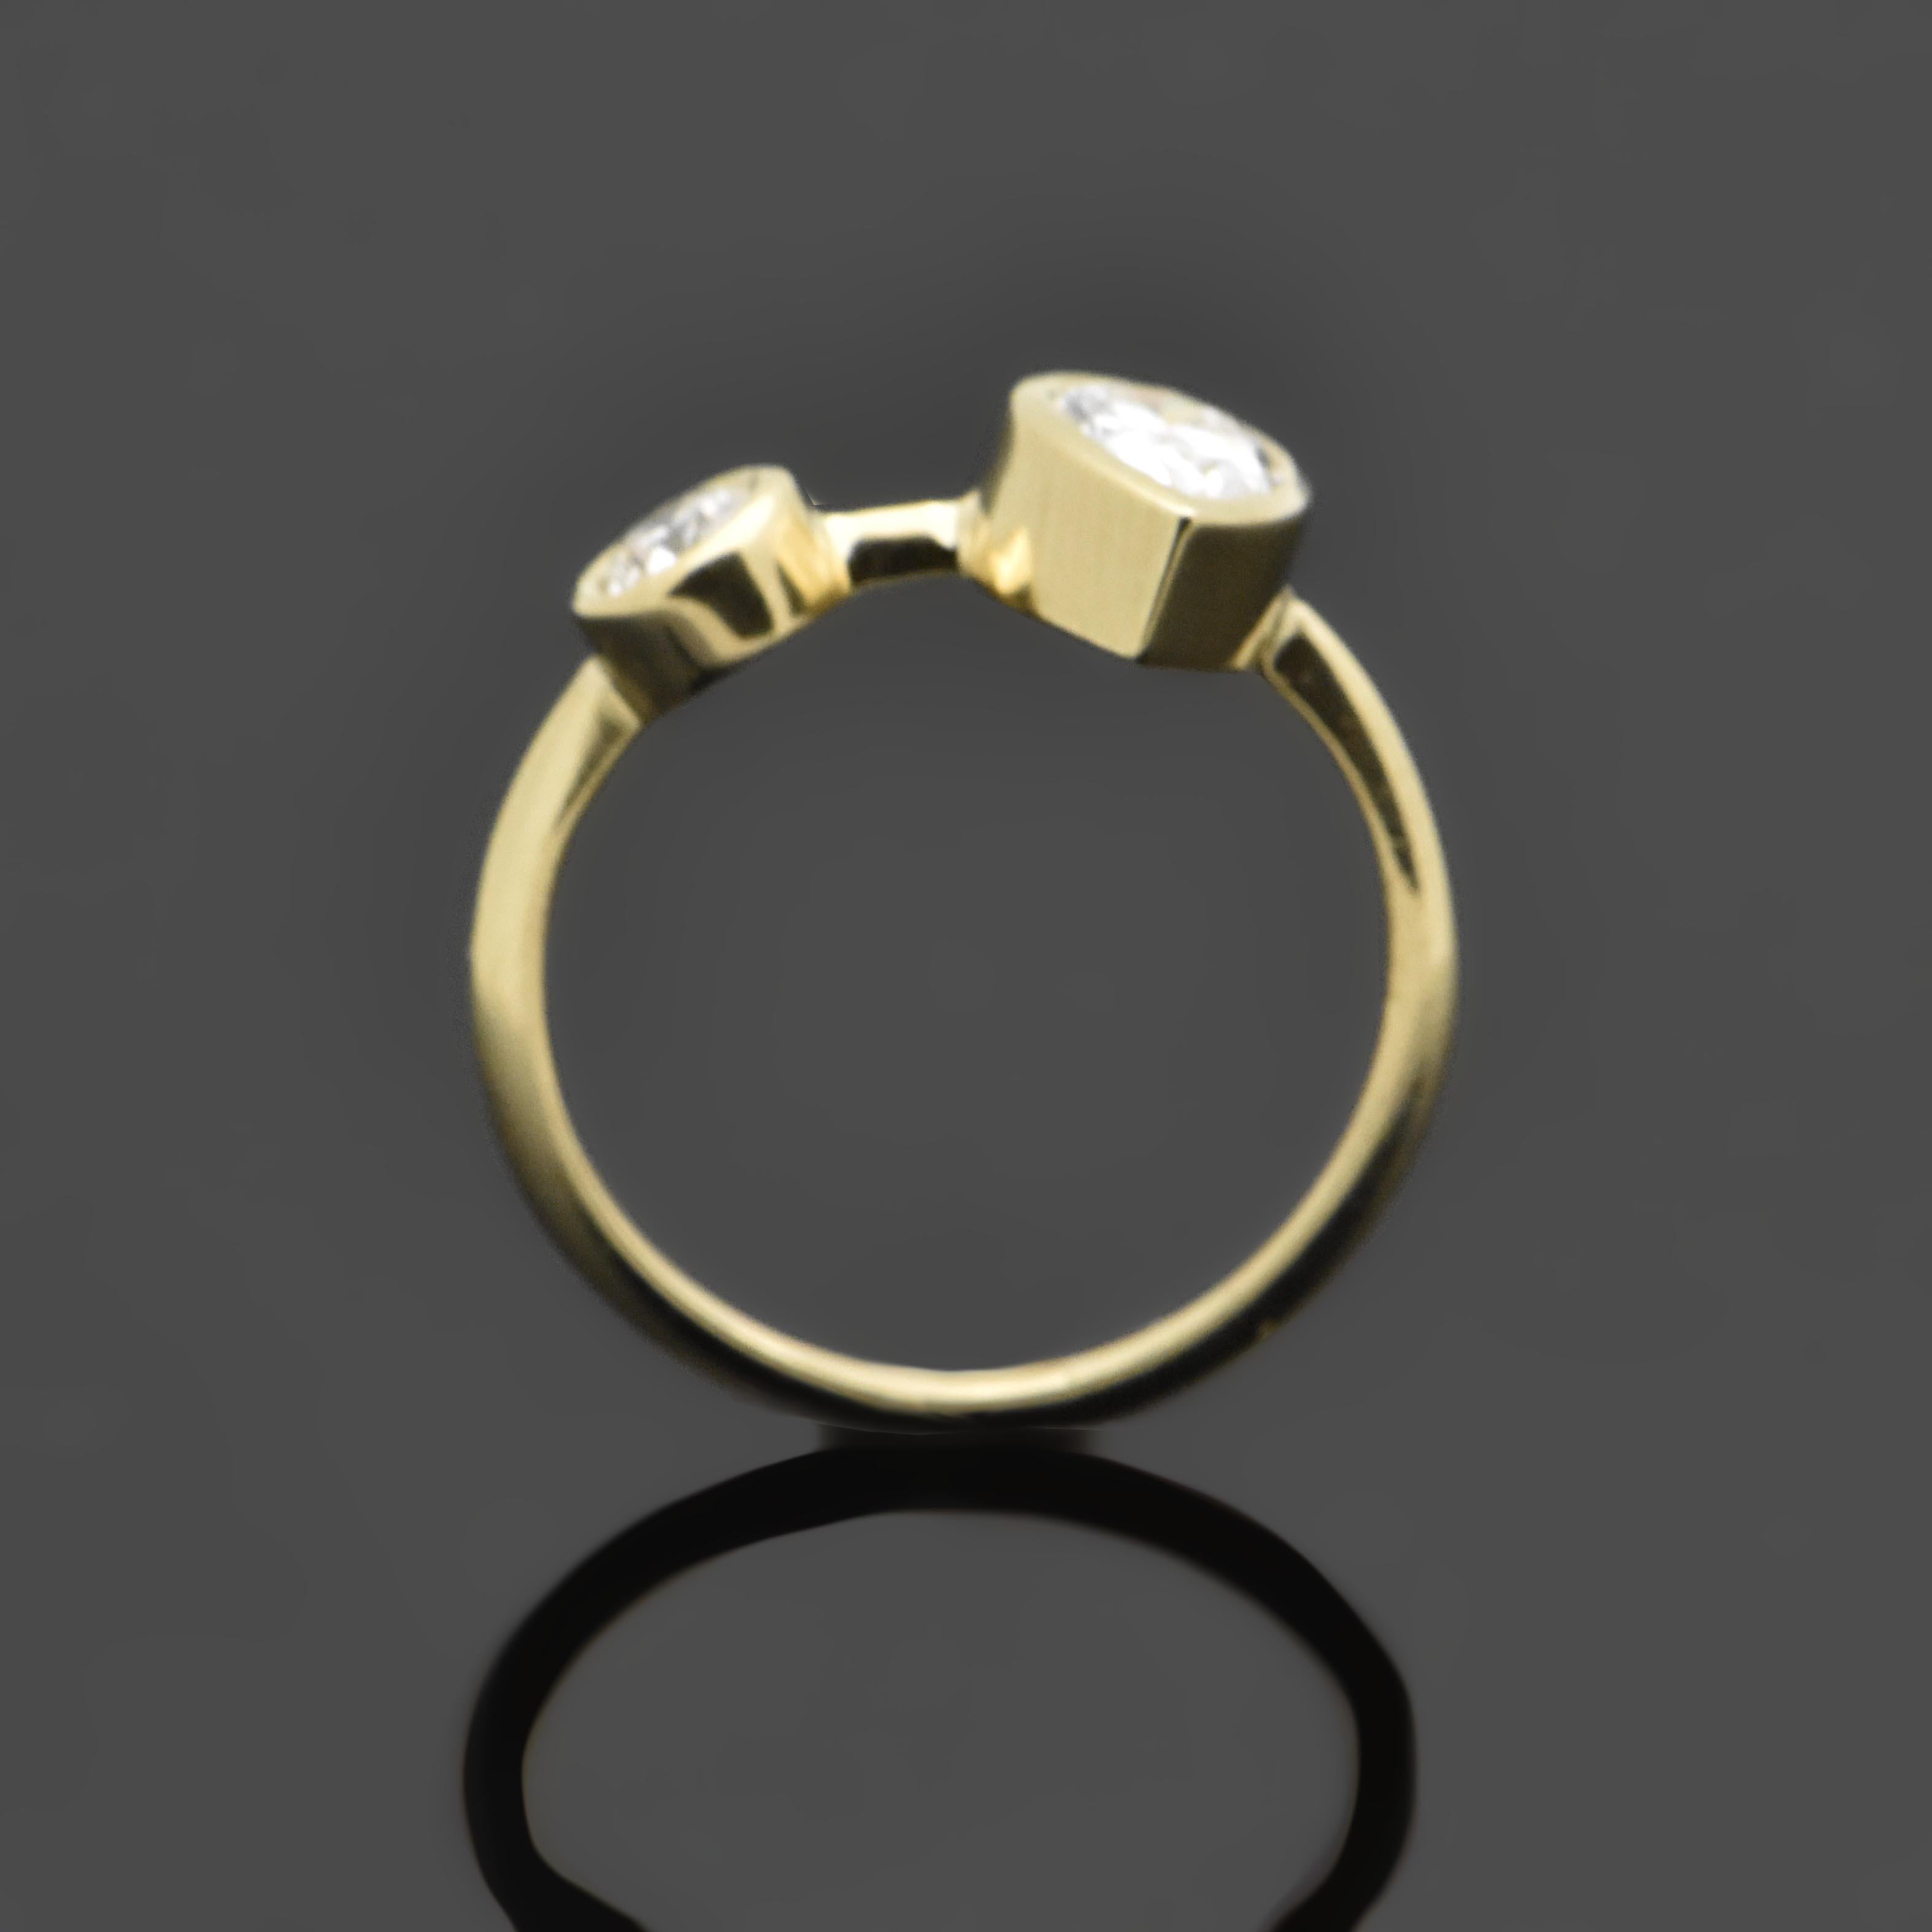 14kt Yellow Gold Diamonds Ring. This setting features a duo of unique bezel set diamonds; one round brilliant cut and one pear cut set onto a delicate yellow gold band. 

This item is a custom order only. Price is for the ring setting only. The